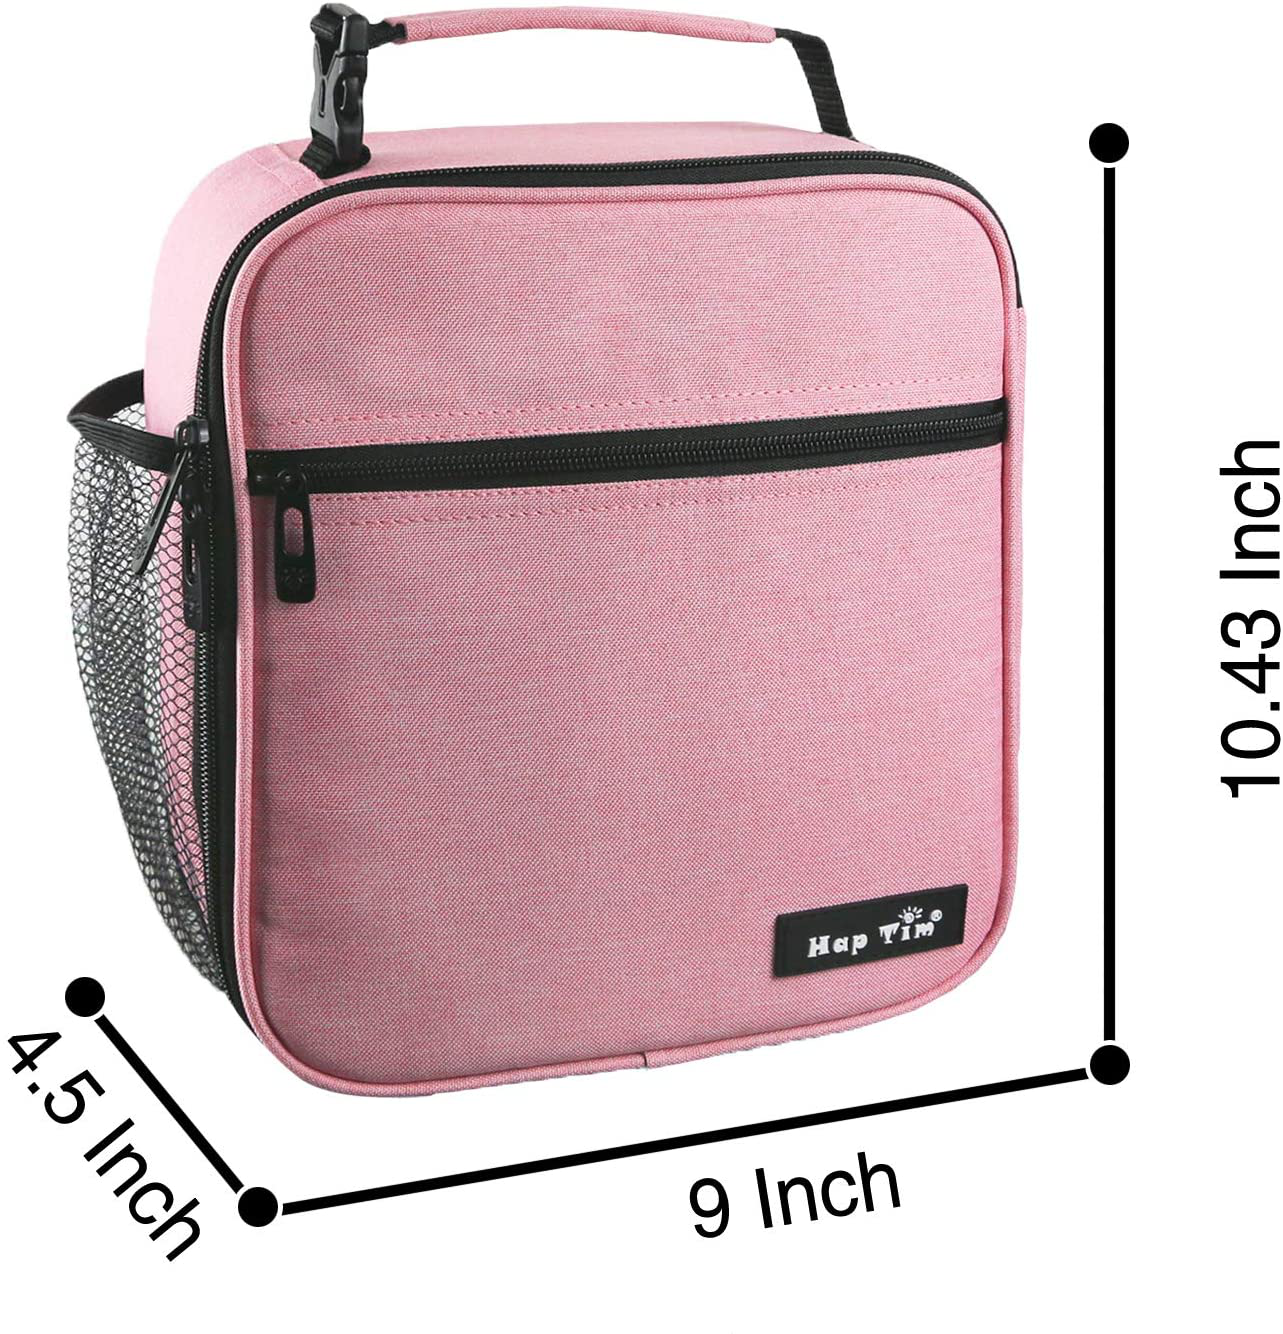 Hap Tim Insulated Lunch Bag for Women,Reusable Lunch Box for Girls,Spacious Lunchbox Adult Cooler Bag Pink (18654-PK)